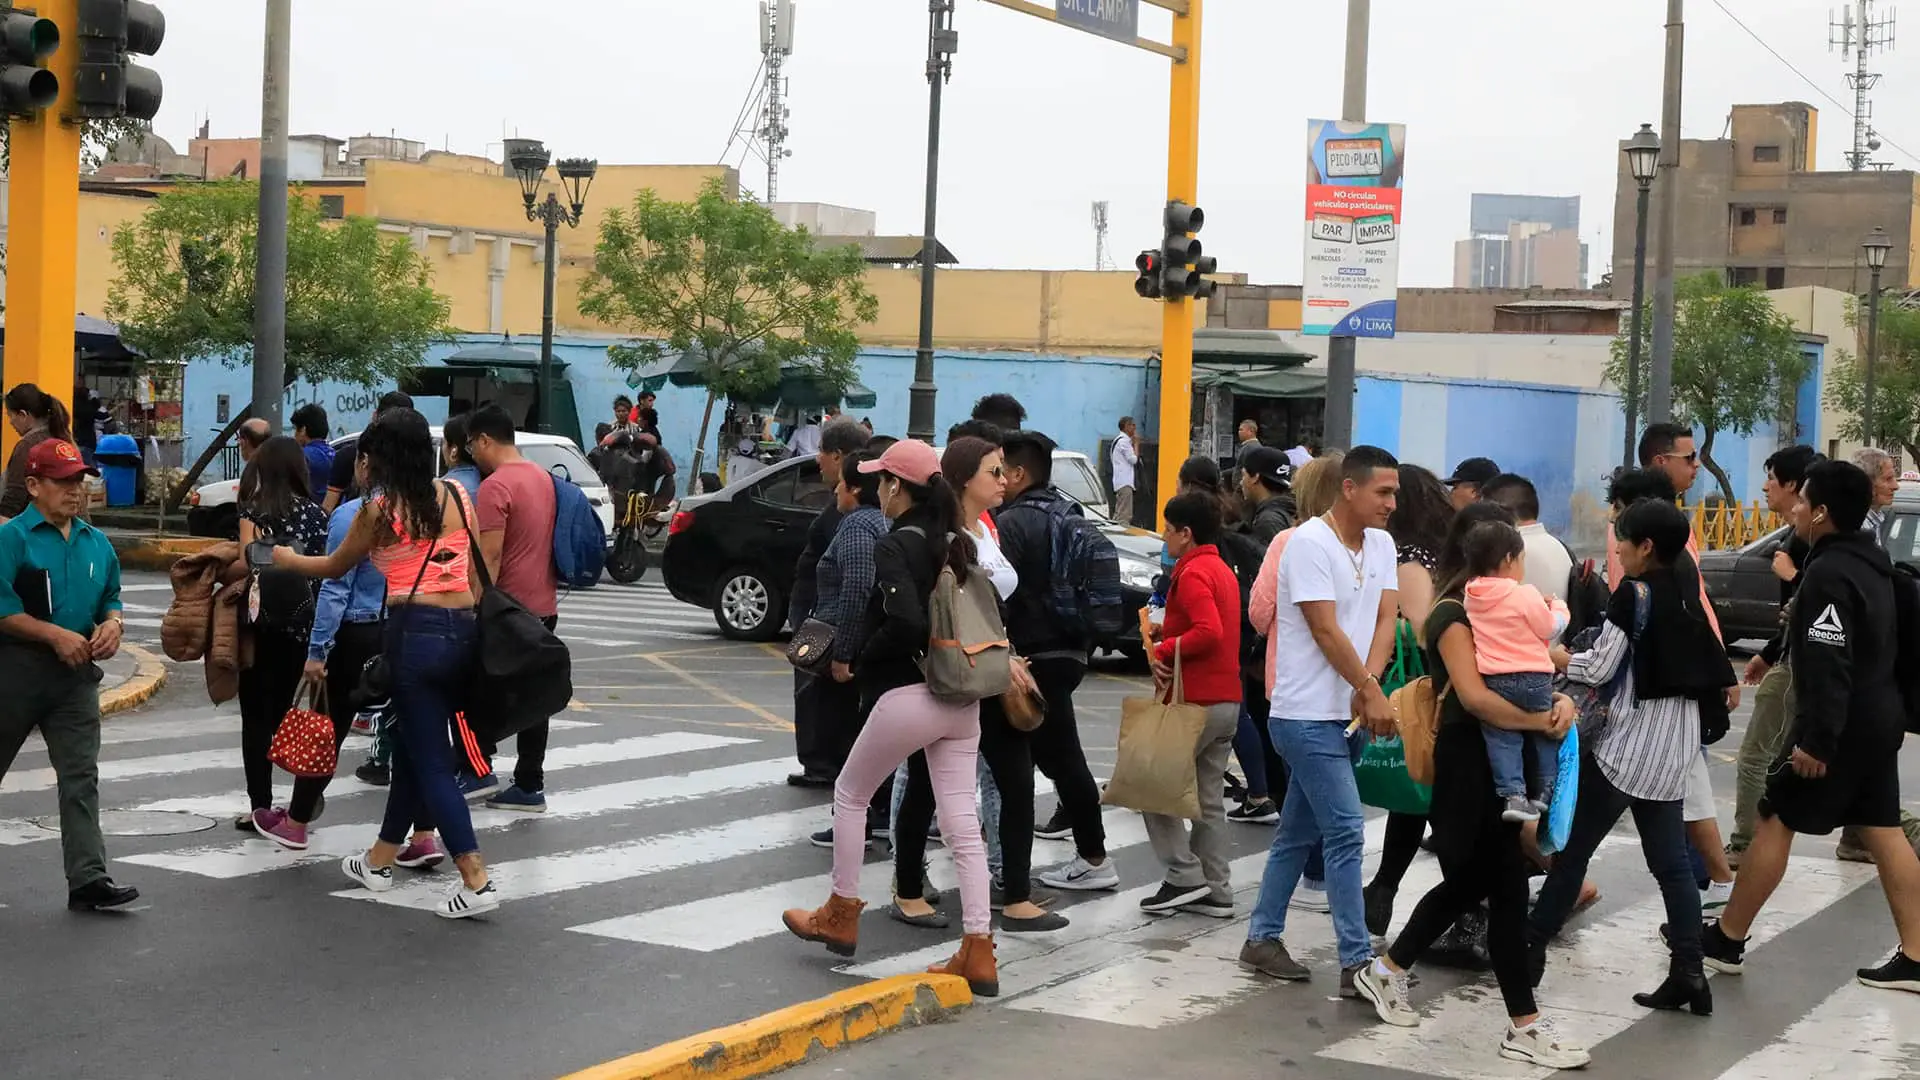 Busy crosswalk in one of the many intersections of the crowded city center of Lima | Responsible Travel Peru